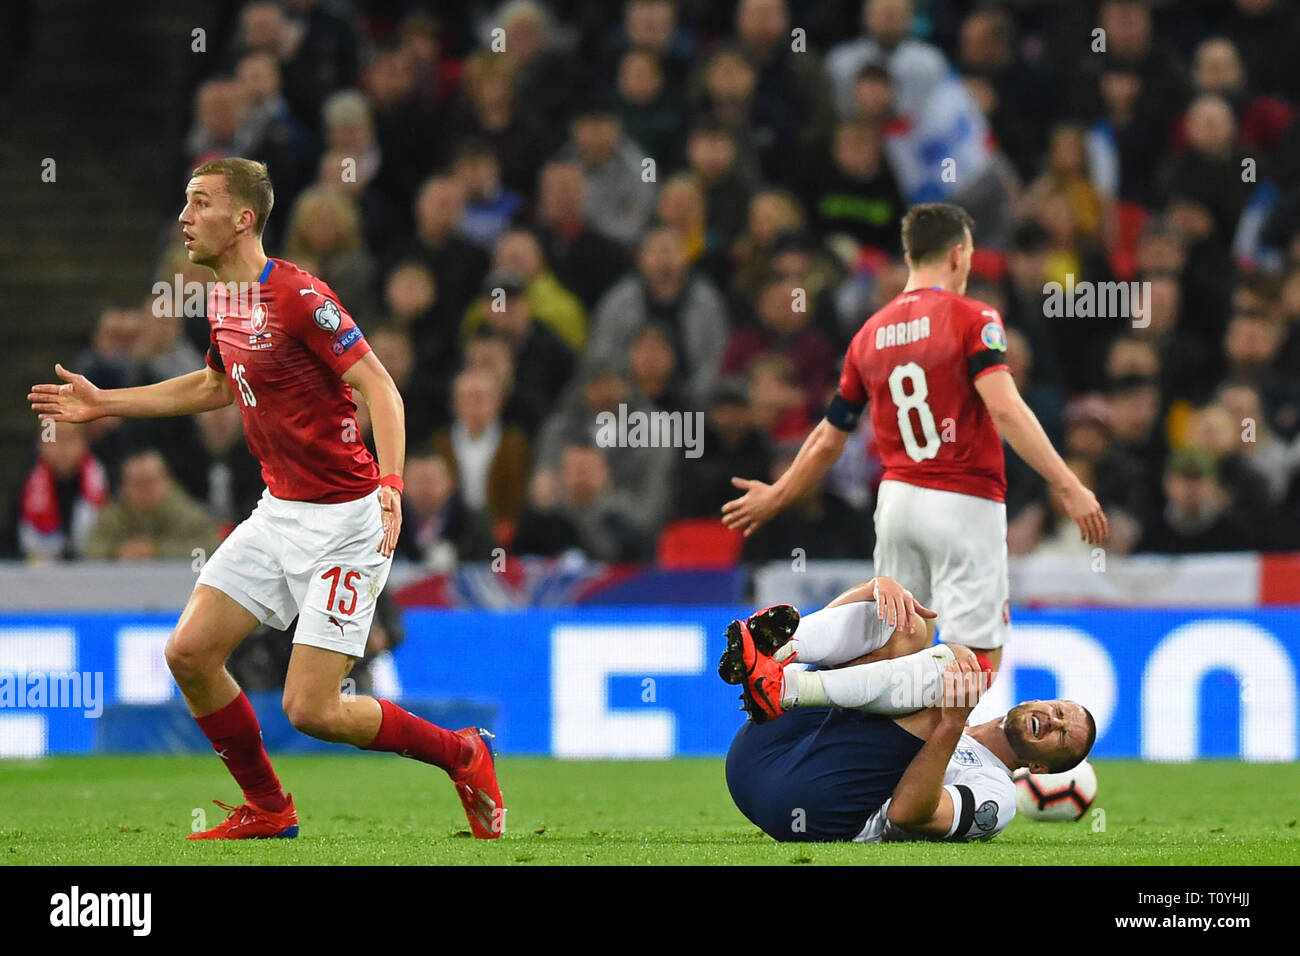 London, UK. 22nd Mar, 2019. Czech Republic midfielder Tomas Soucek looks to the referee after fouling England midfielder Eric Dier during the UEFA European Championship Group A Qualifying match between England and Czech Republic at Wembley Stadium, London on Saturday 23rd March 2019. (Credit: Jon Bromley | MI News ) Credit: MI News & Sport /Alamy Live News Stock Photo